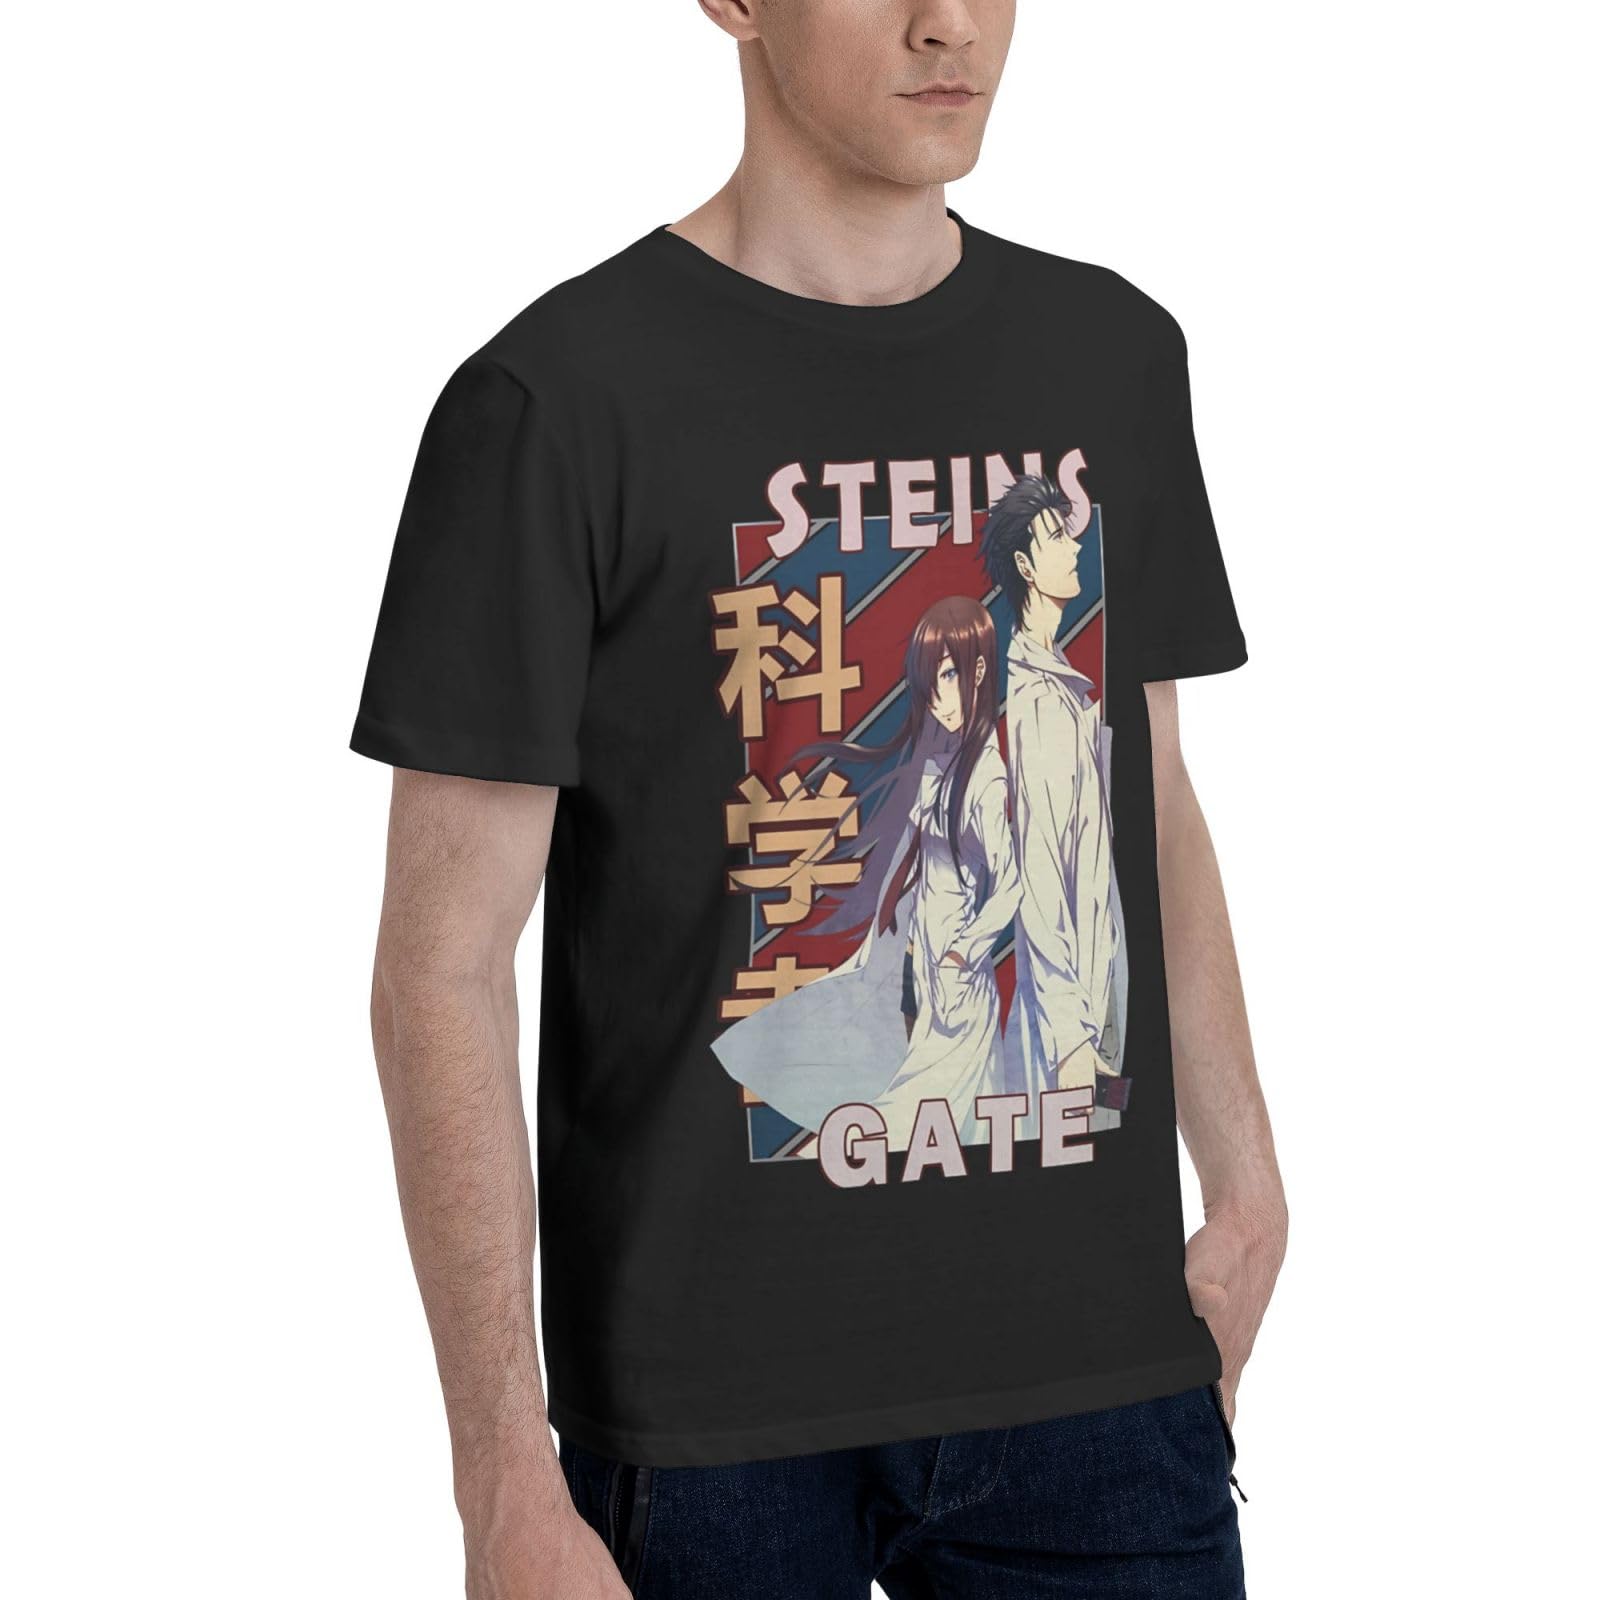 Anime Steins Gate T Shirt Man's Summer Round Neck Tops Casual Short Sleeves Tee Black